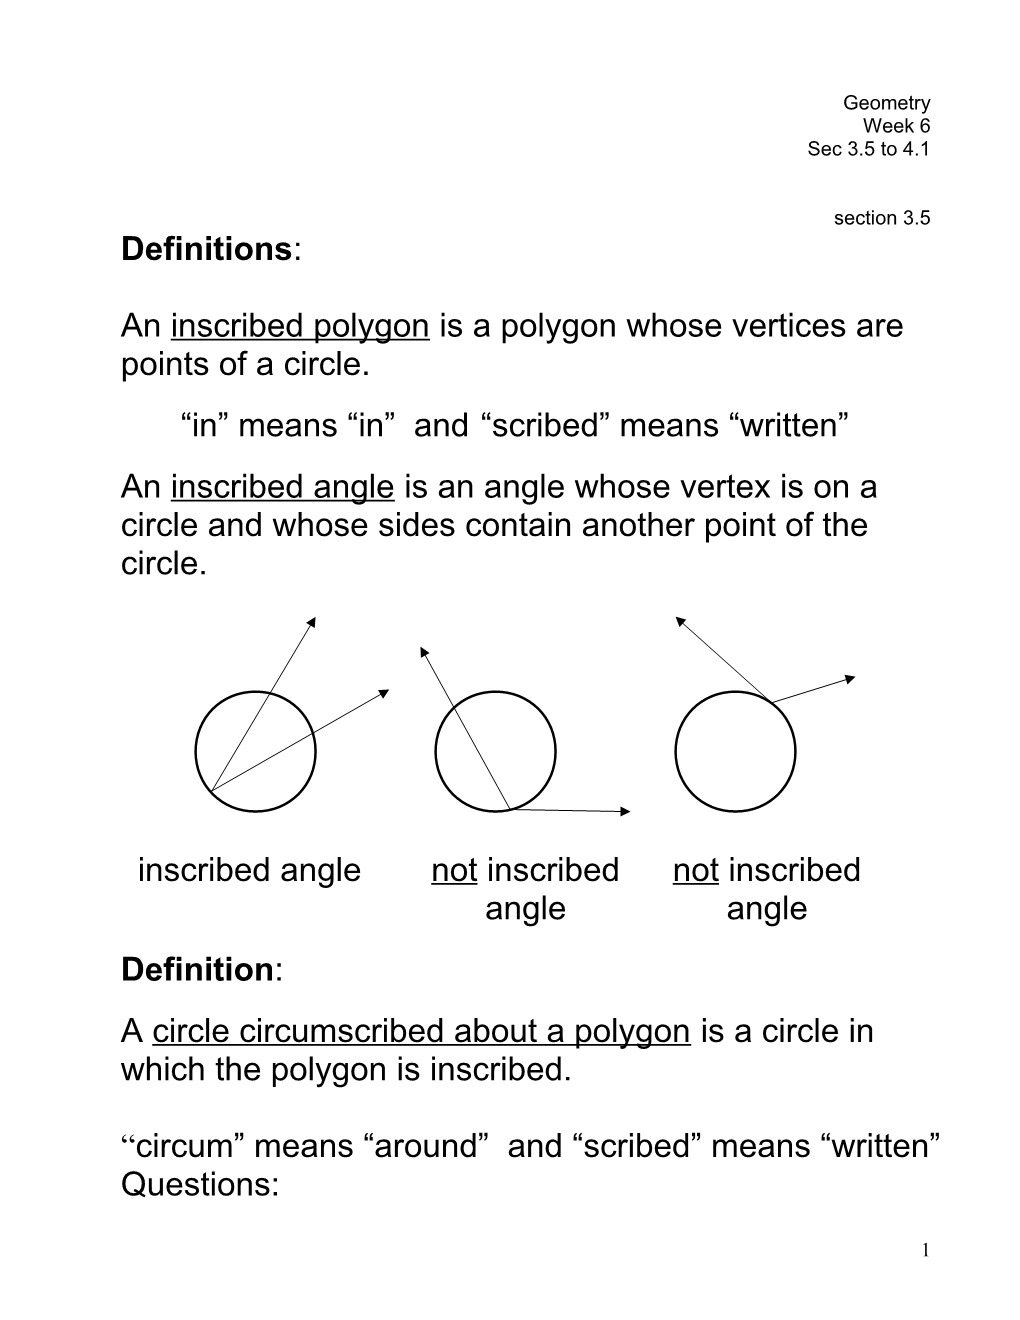 An Inscribed Polygon Is a Polygon Whose Vertices Are Points of a Circle